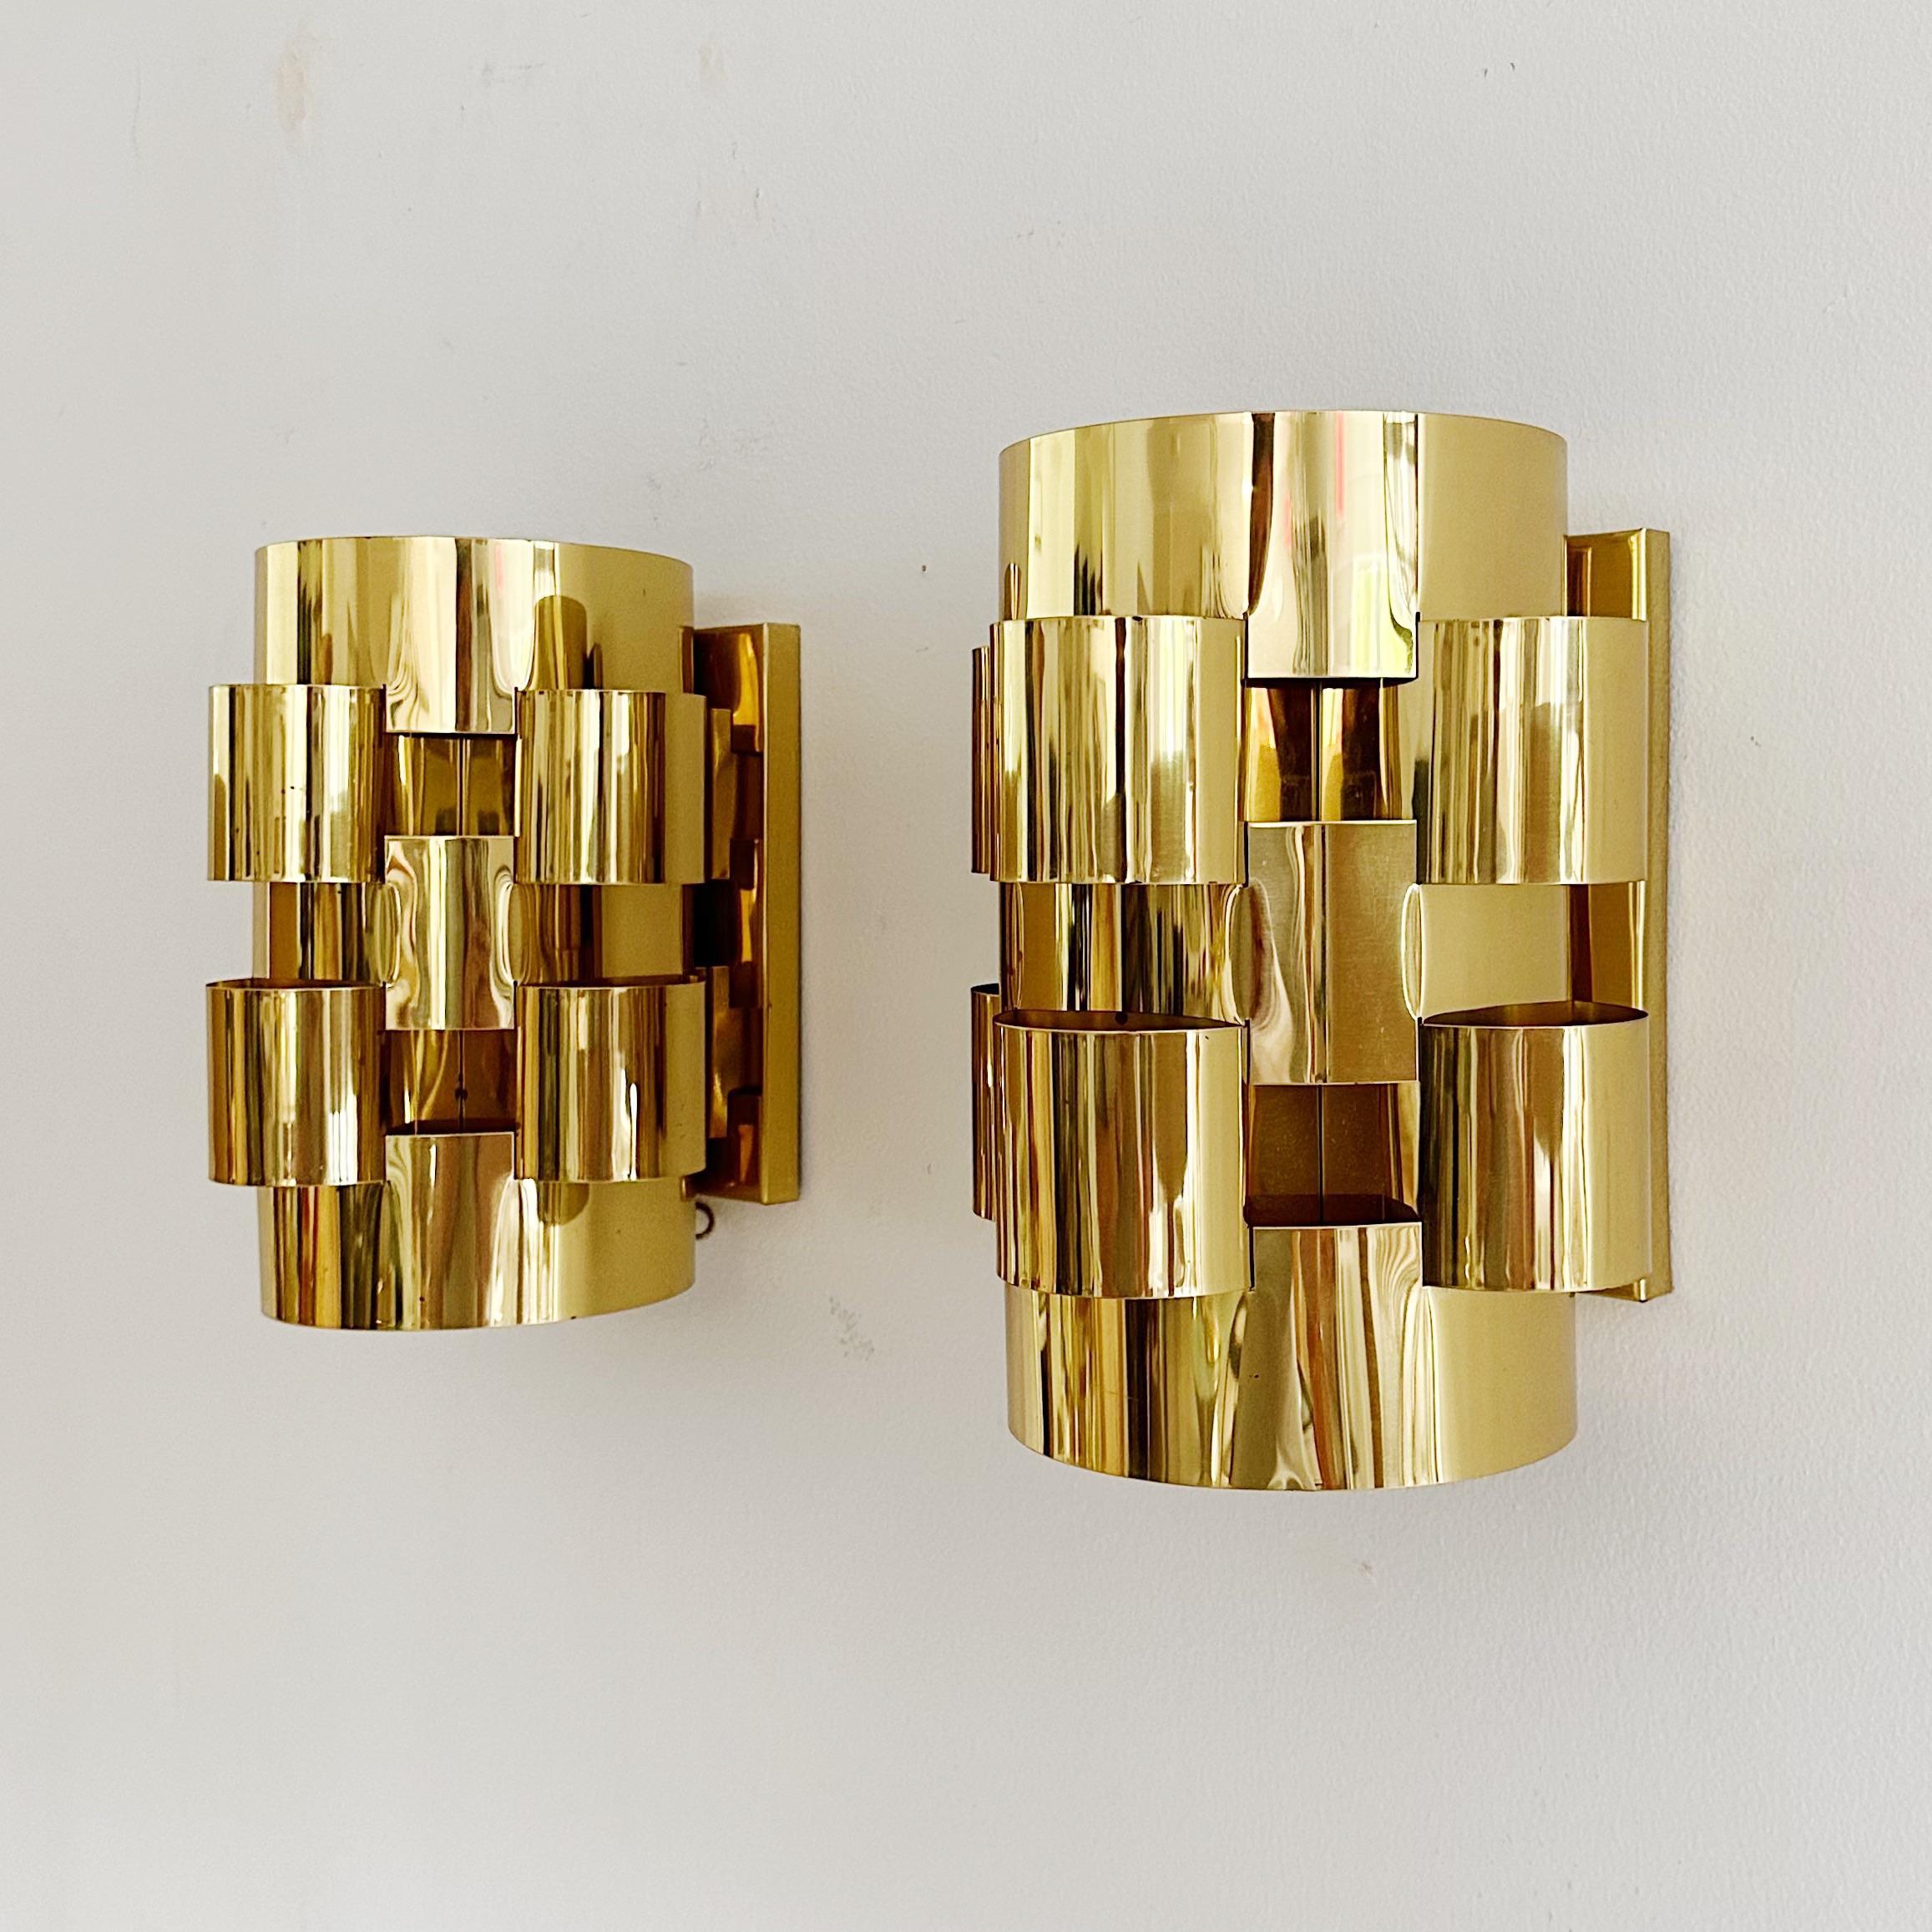 Curtis Jere sconces, brass clouds, signed. Pair of cloud form sconces in polished and lacquered brass. both of these sconces are signed 